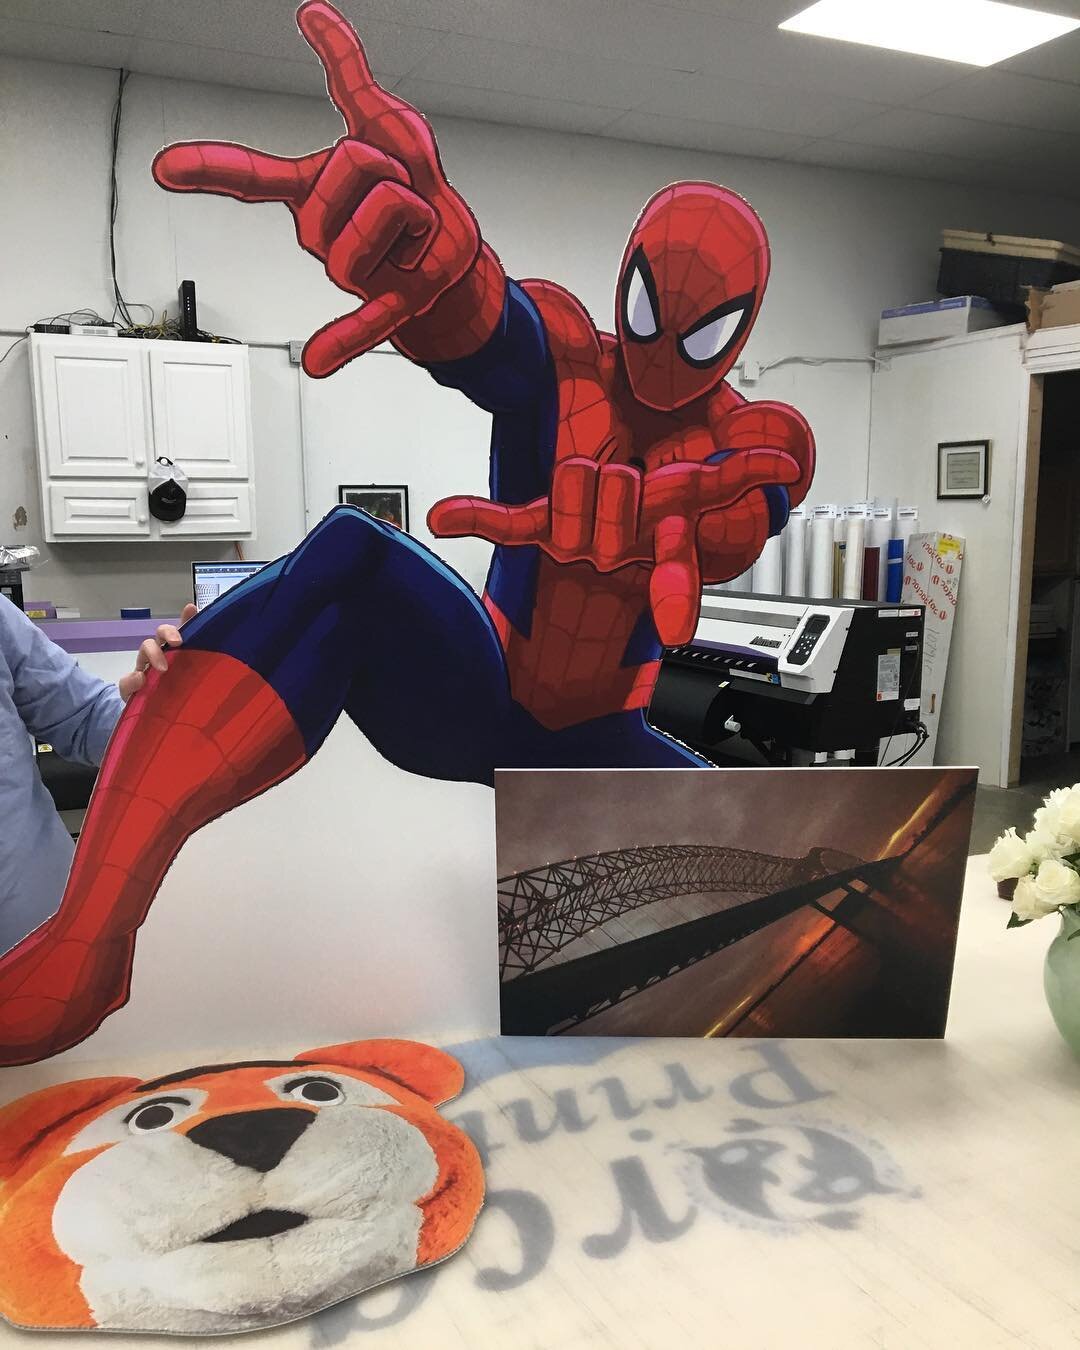 We couldn&rsquo;t do a #Batman cut-out without also doing a #Spiderman one! Especially with the new Into the Spider-verse movie out this week. #comics #printing #memphis #choose901 #ilovememphis